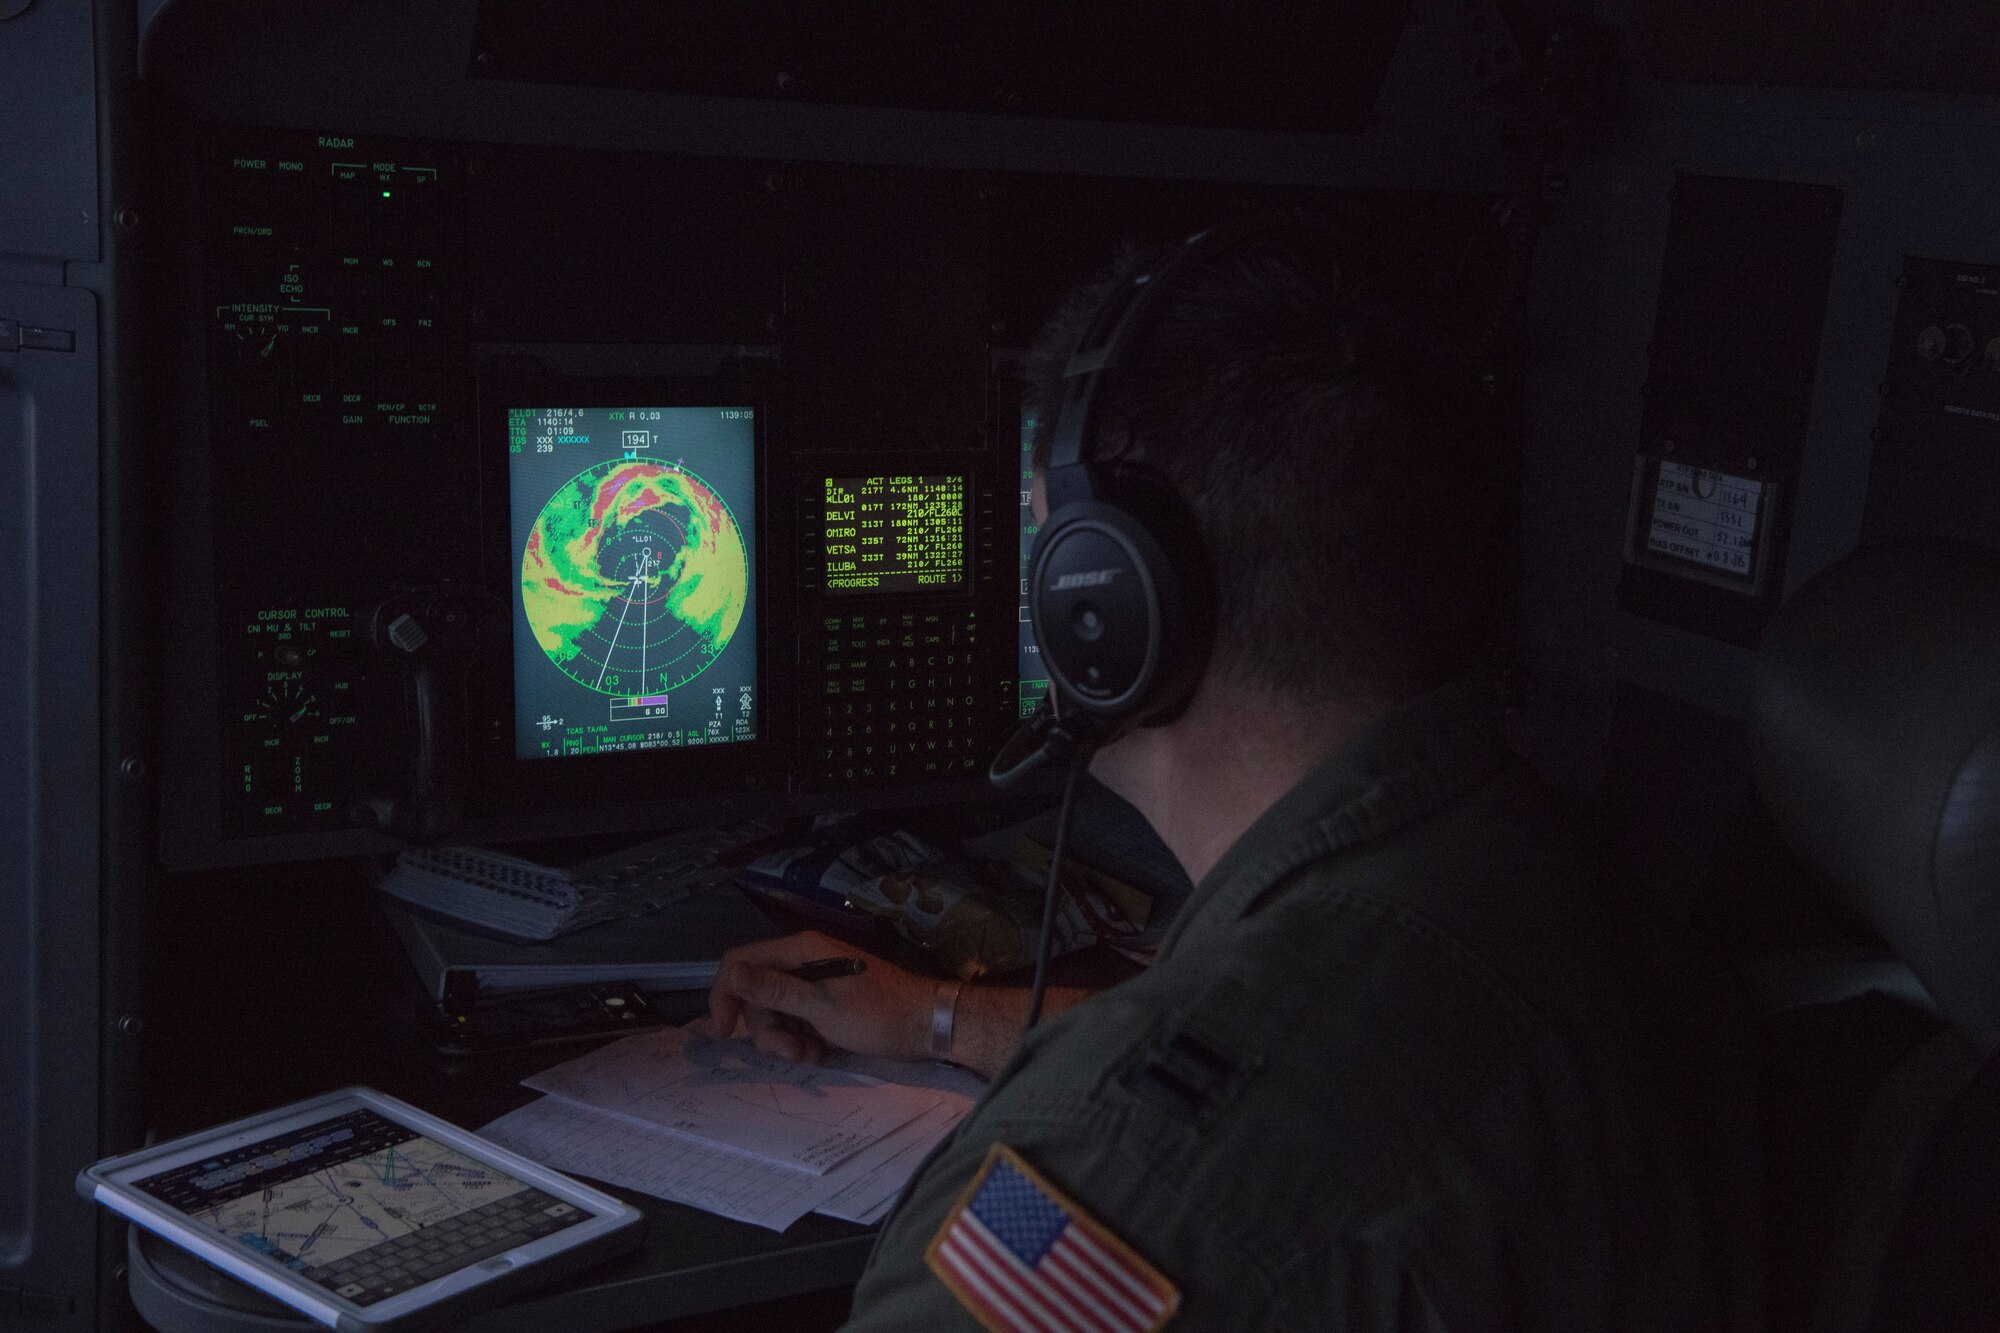 Capt. Steve Bichsel, navigator for the 53rd Weather Reconnaissance Squadron at Keesler Air Force Base, Miss., monitors the radar as his crew flies into the eye of Hurricane Eta November 3, 2020. Eta made landfall in WHERE, Nicaragua as a major hurricane shortly after the flight. (U.S. Air Force photo by Senior Airman Kristen Pittman)